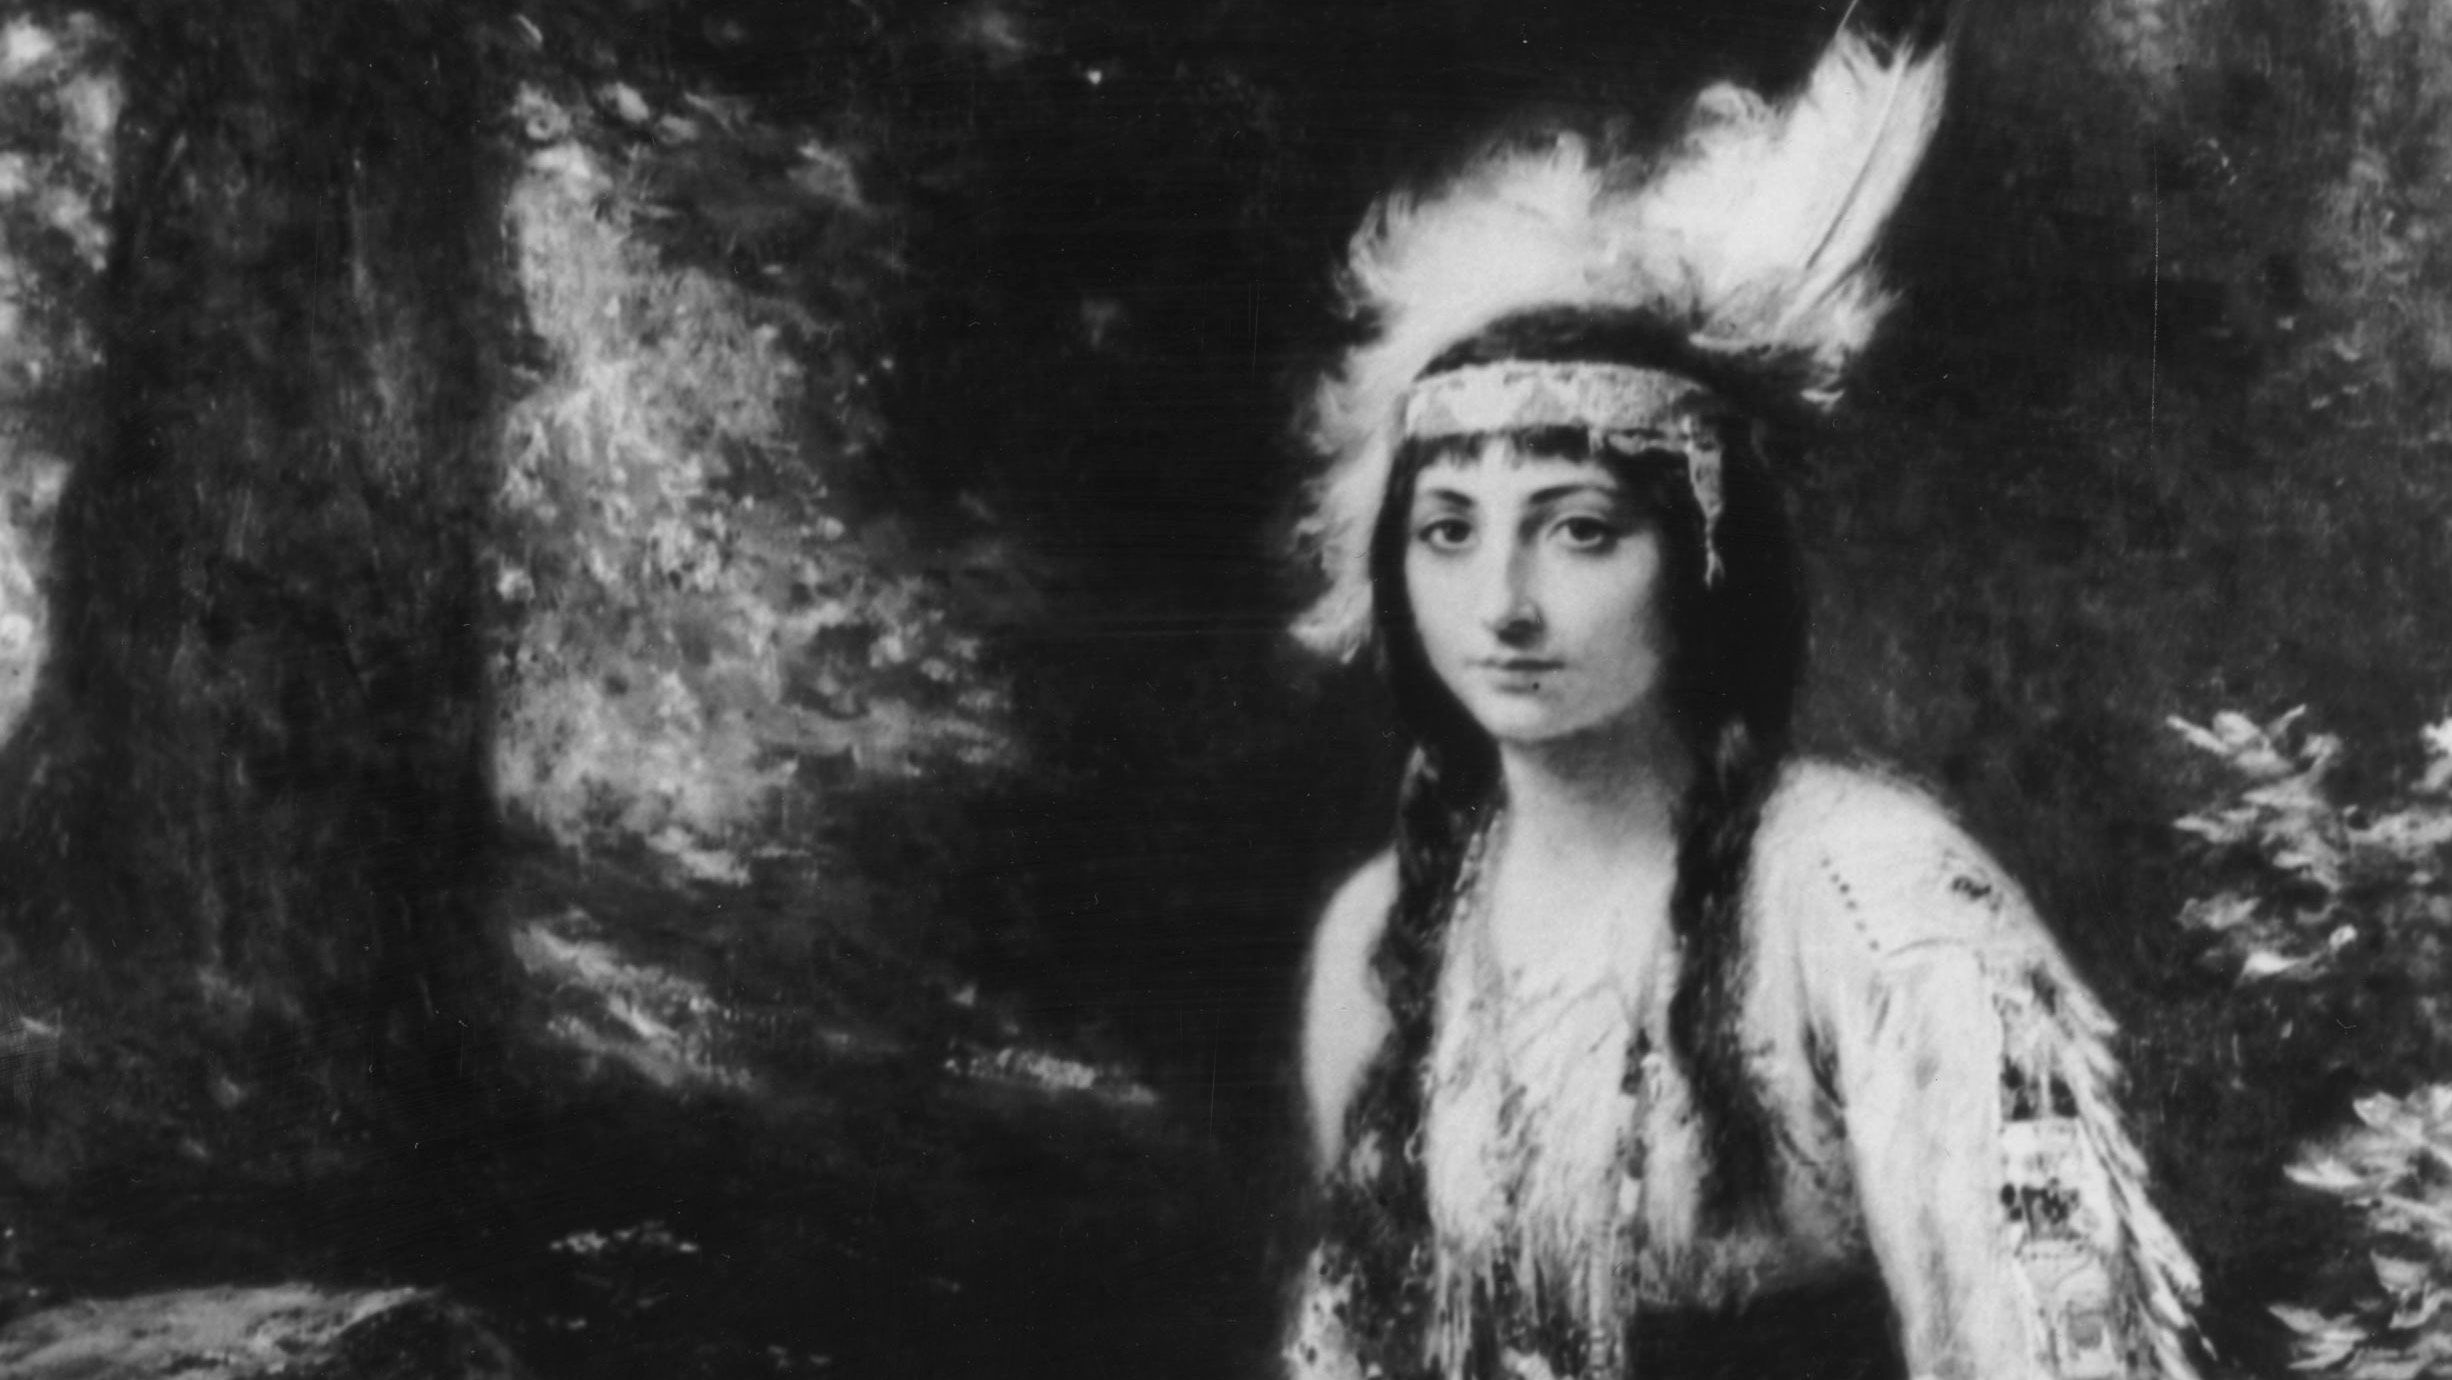 Edward Norton discovers real-life Pocahontas is his 12th great-grandmother  | CNN